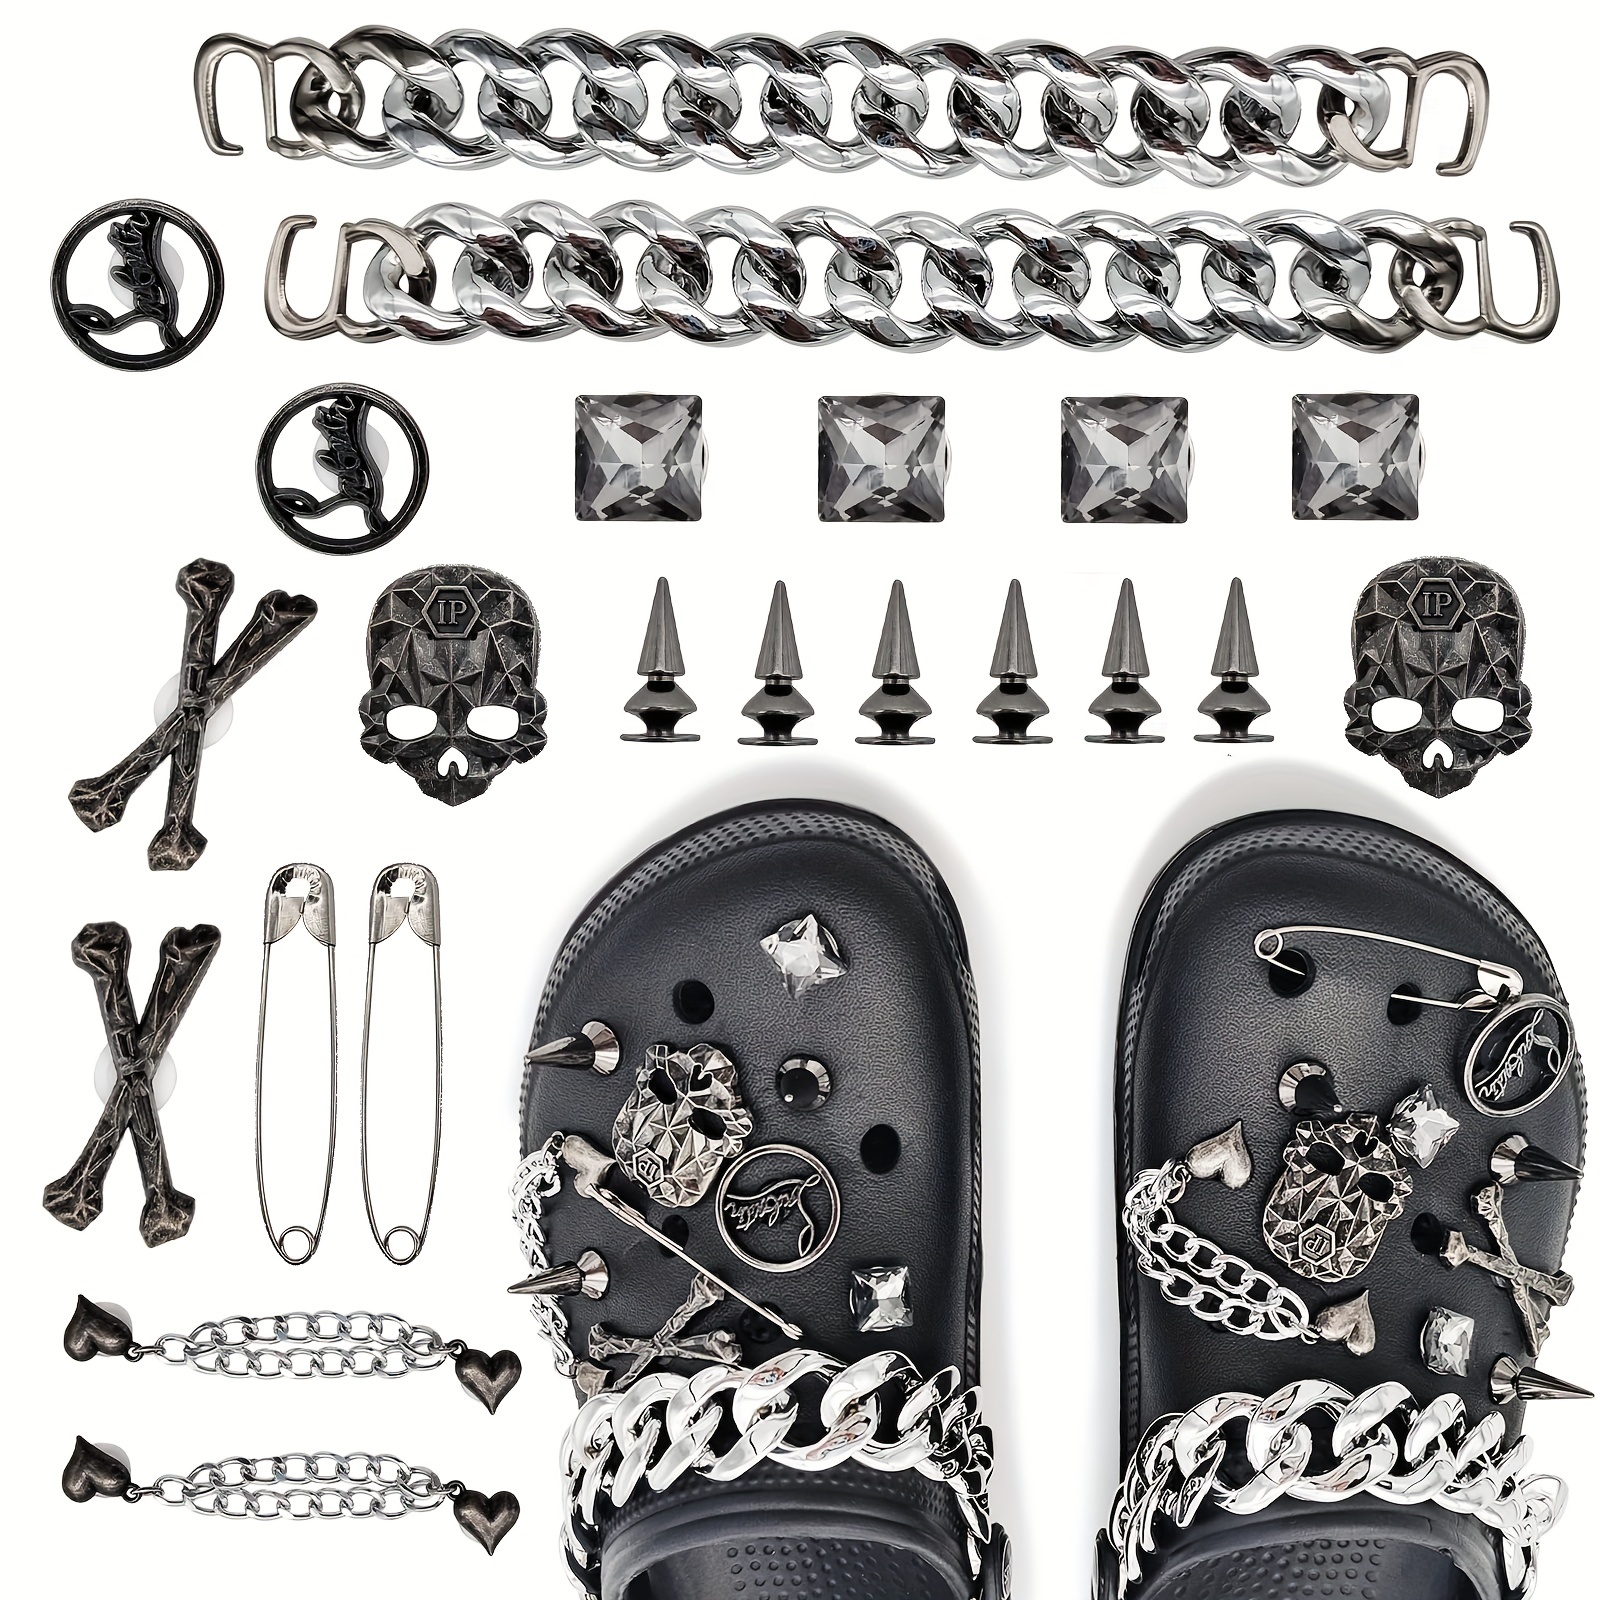 Metal Punk Charms and Chains Goth Shoe Charms Metal Spike Shoe Charm Spikes Croc  Charms Silver Shoe Charm Silver Chain Shoe Charm 